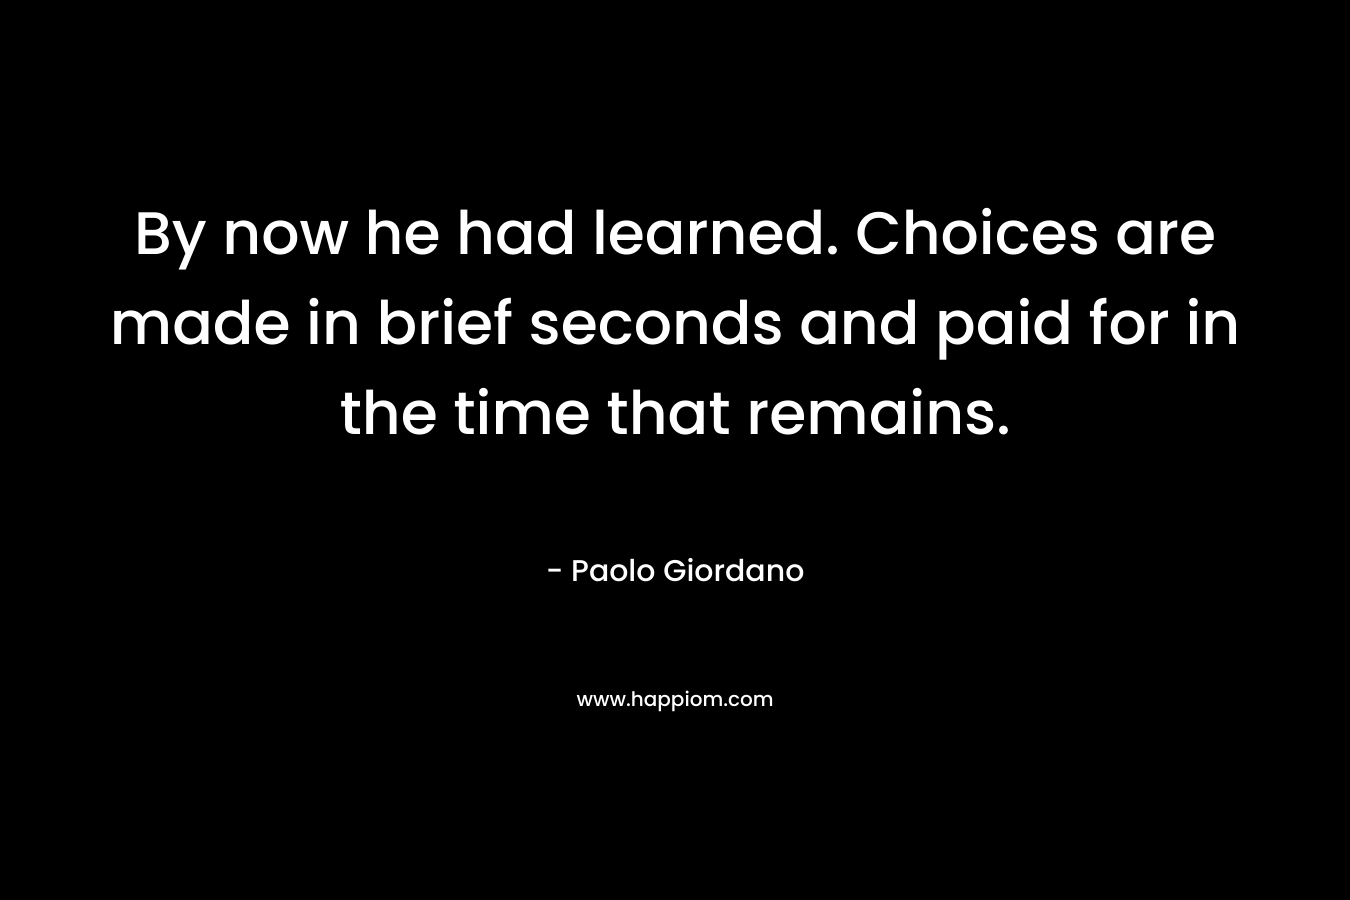 By now he had learned. Choices are made in brief seconds and paid for in the time that remains. – Paolo Giordano